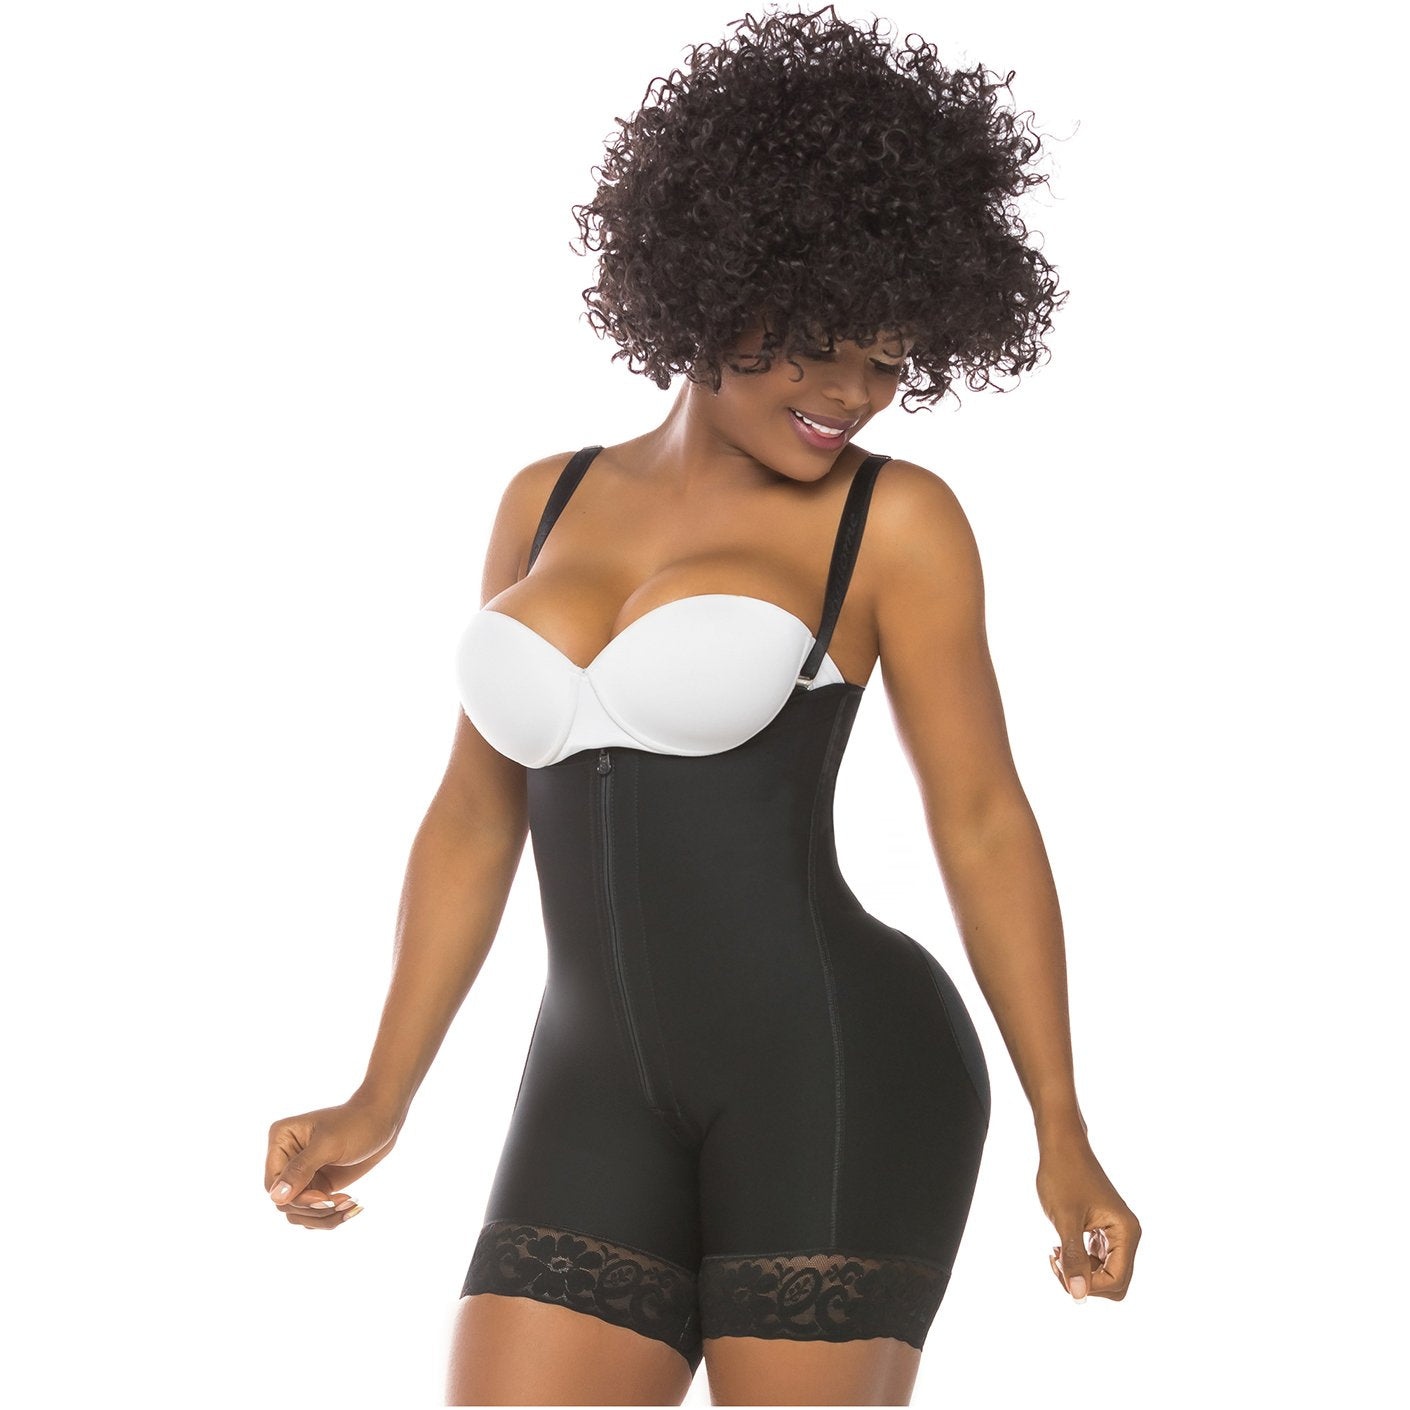 Colombian Tummy Control Postpartum, Daily Use Girdle